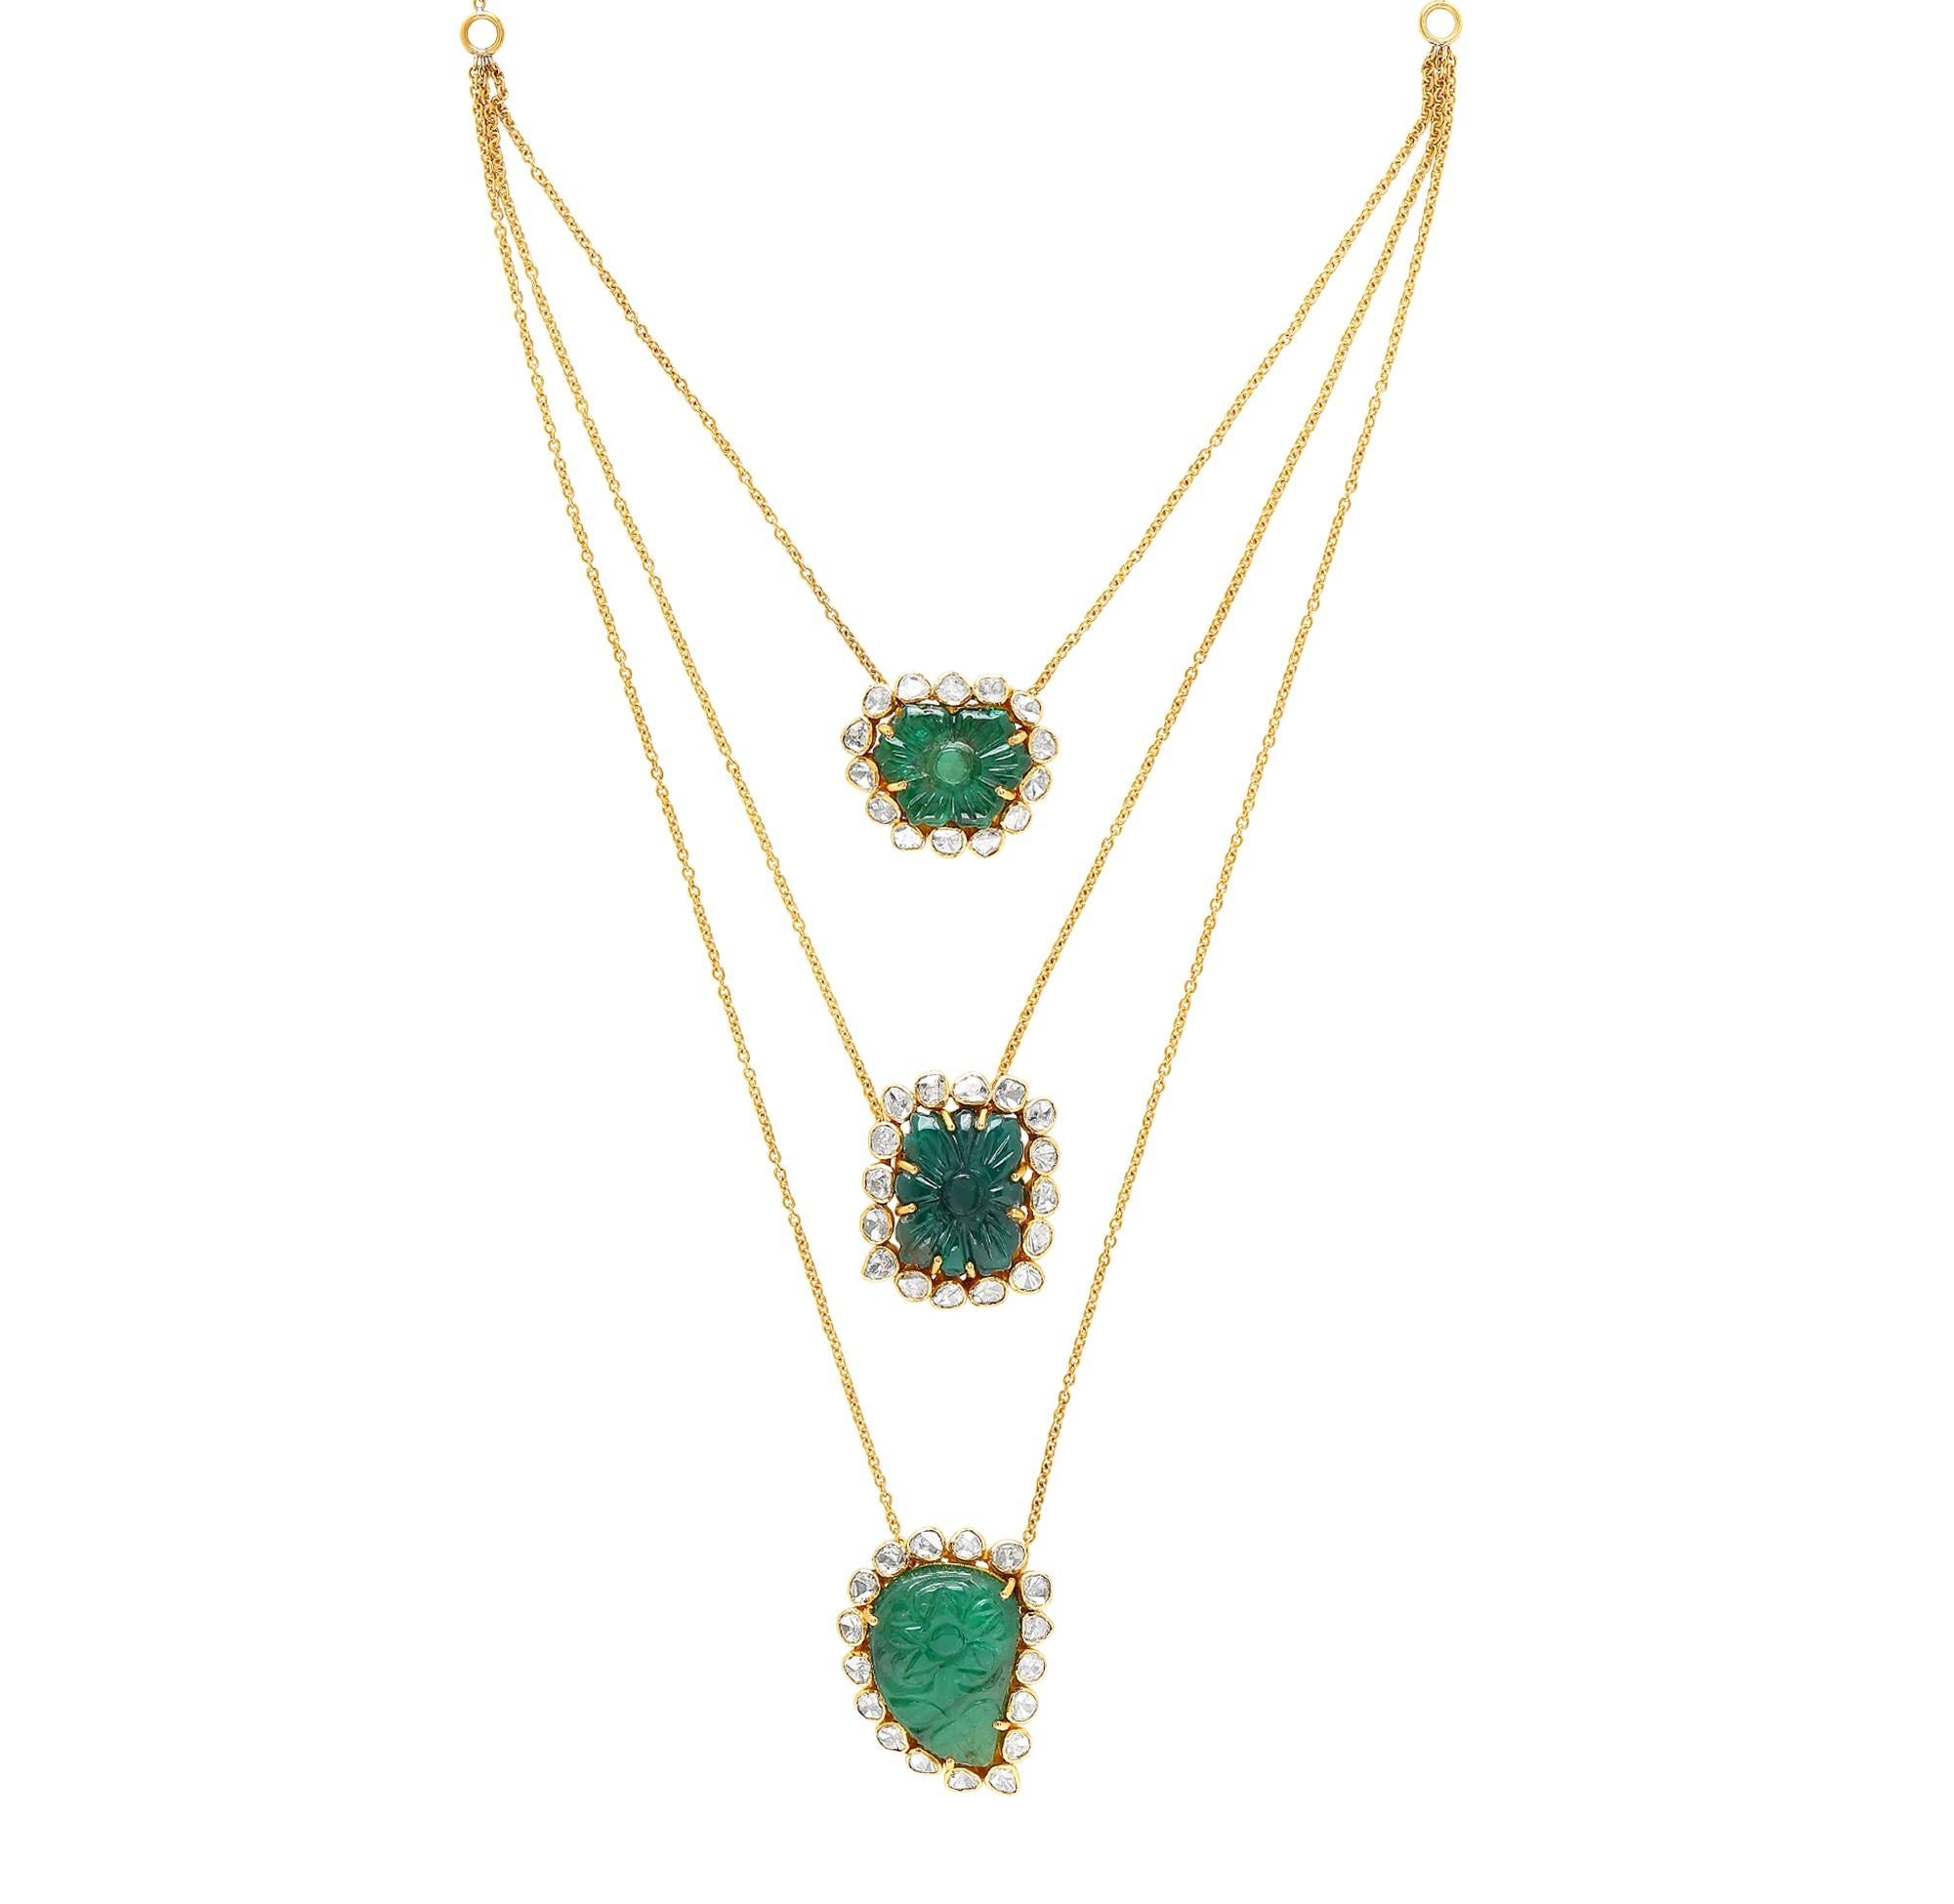 This necklace is festooned with hand-carved natural Emeralds and accentuated with Polki Diamonds (Uncut Diamonds) set in 14 Karat Yellow Gold, it’s an outer manifestation of your inner shine.
Size: Adjustable. 16in - 18in (inner most layer).
Behold